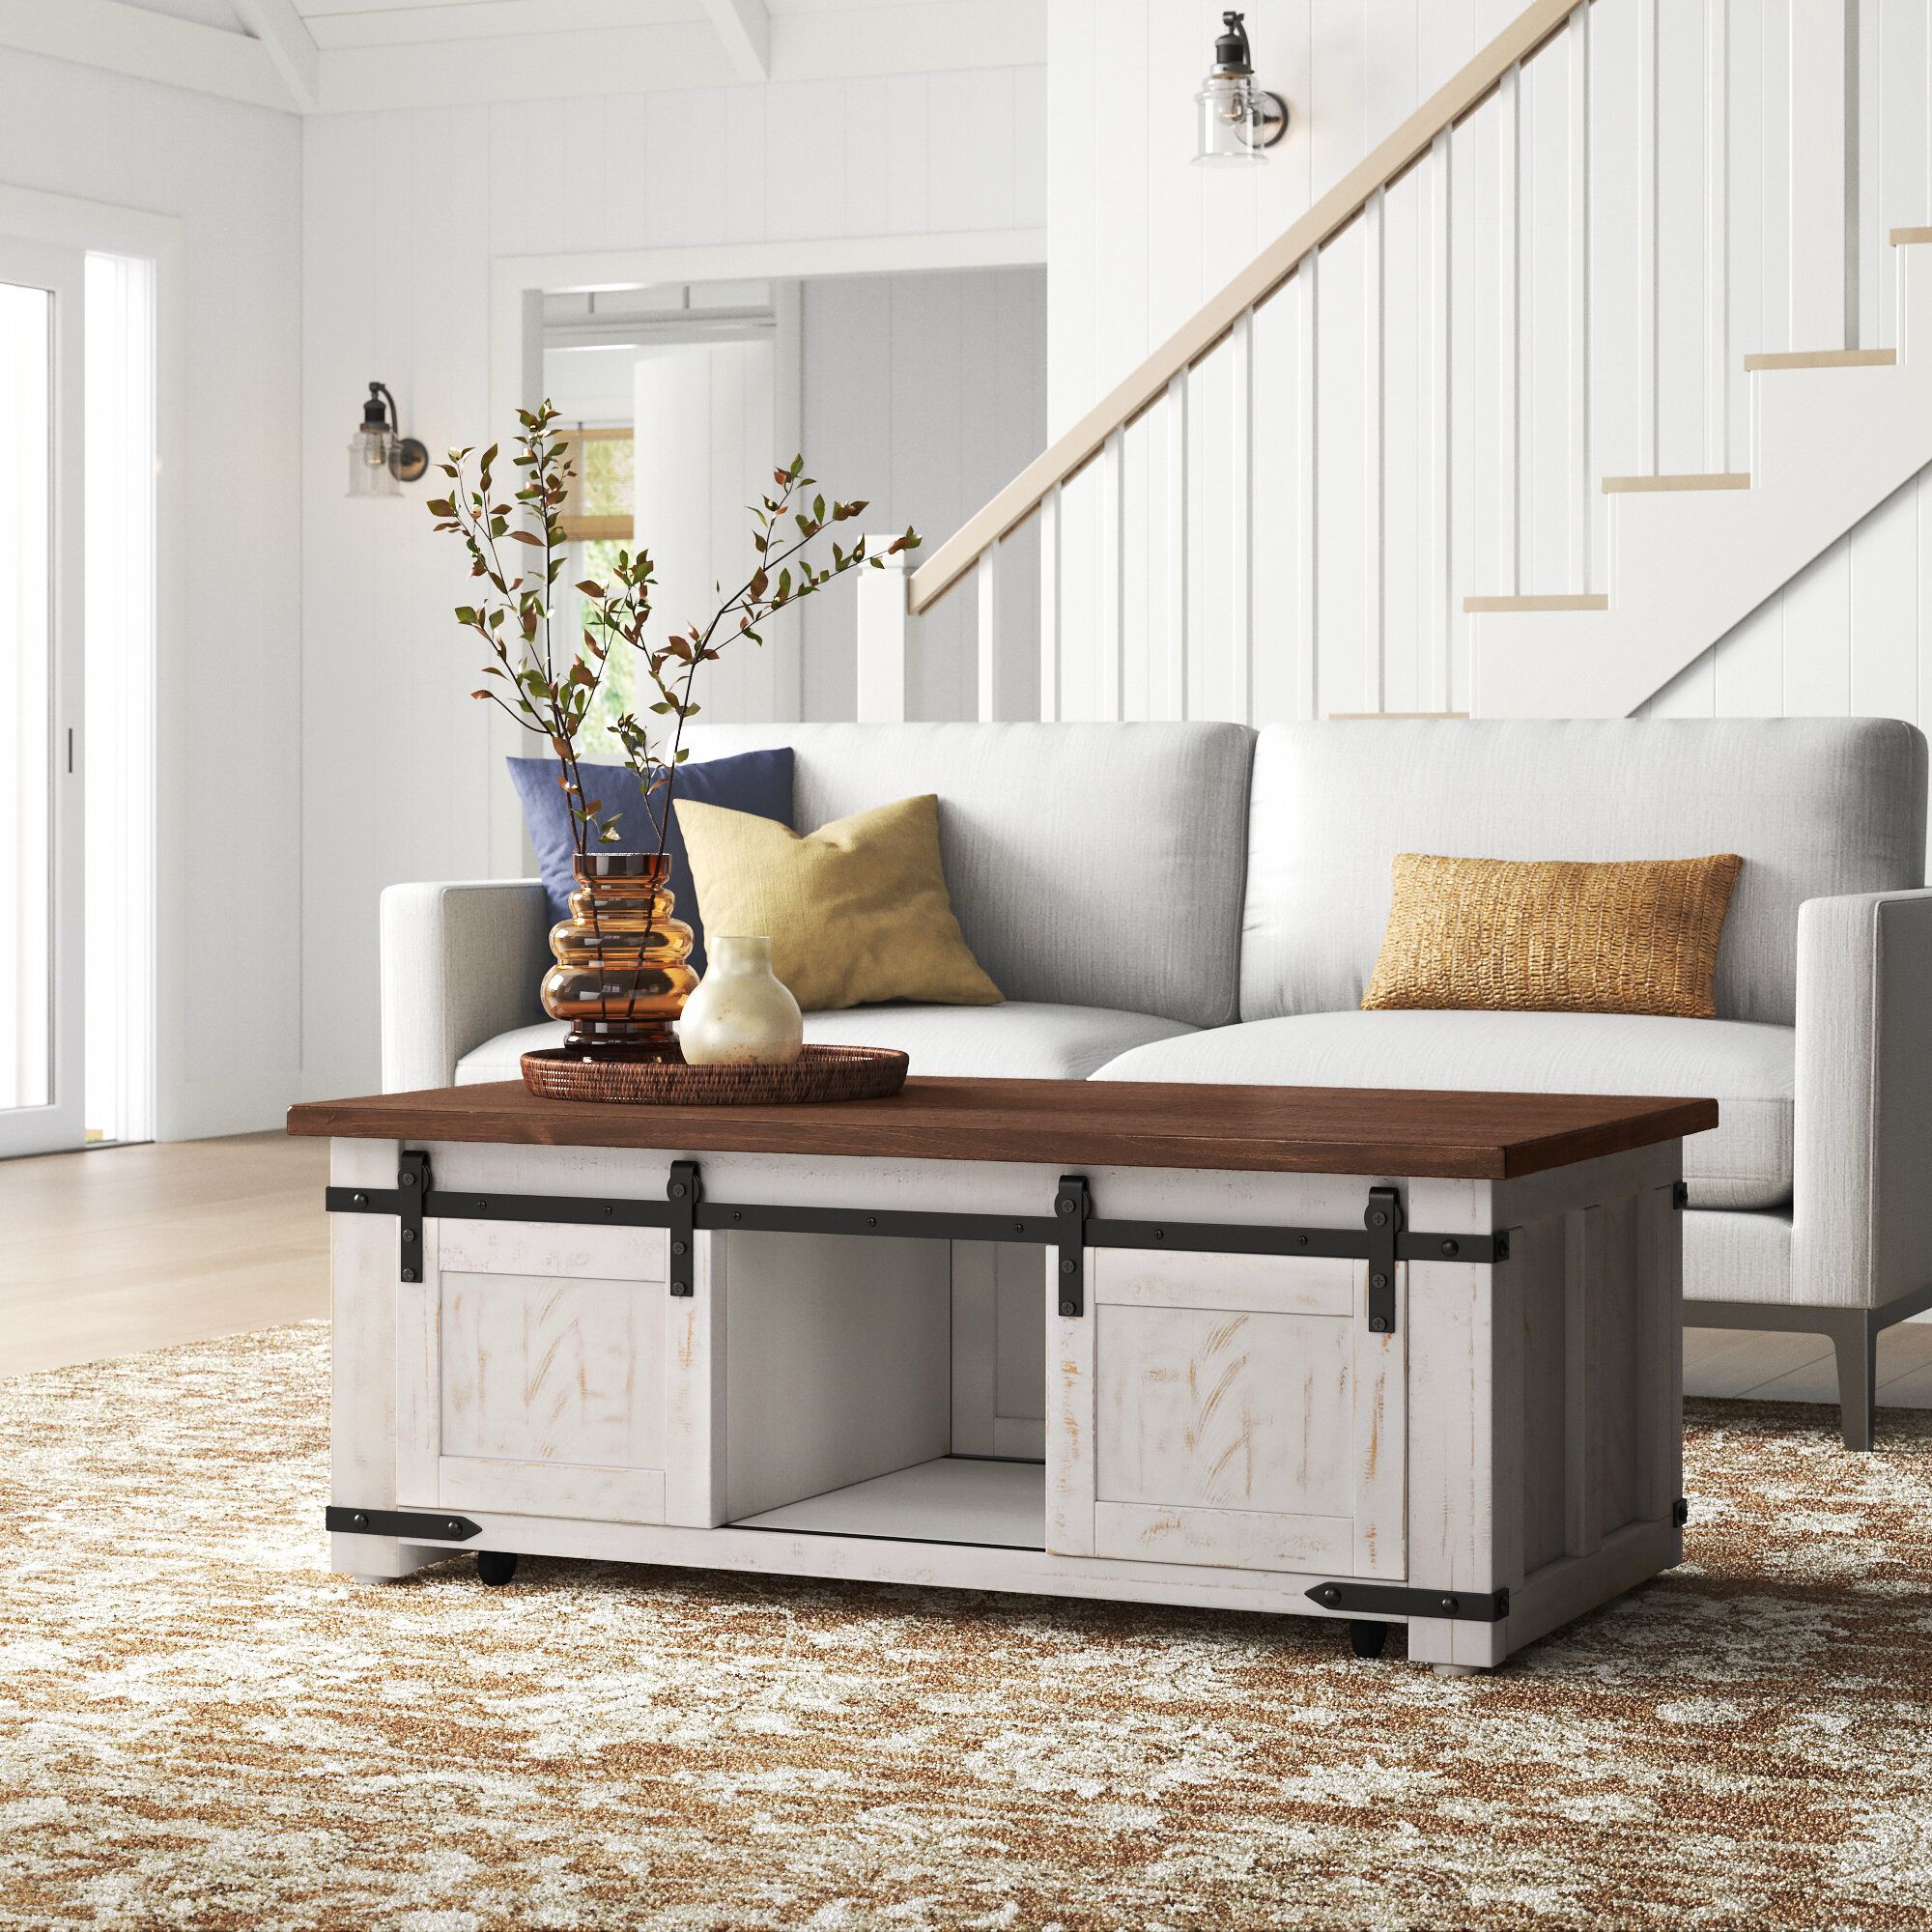 Sand & Stable Sean Coffee Table & Reviews | Wayfair Inside Coffee Tables With Storage And Barn Doors (Photo 12 of 15)